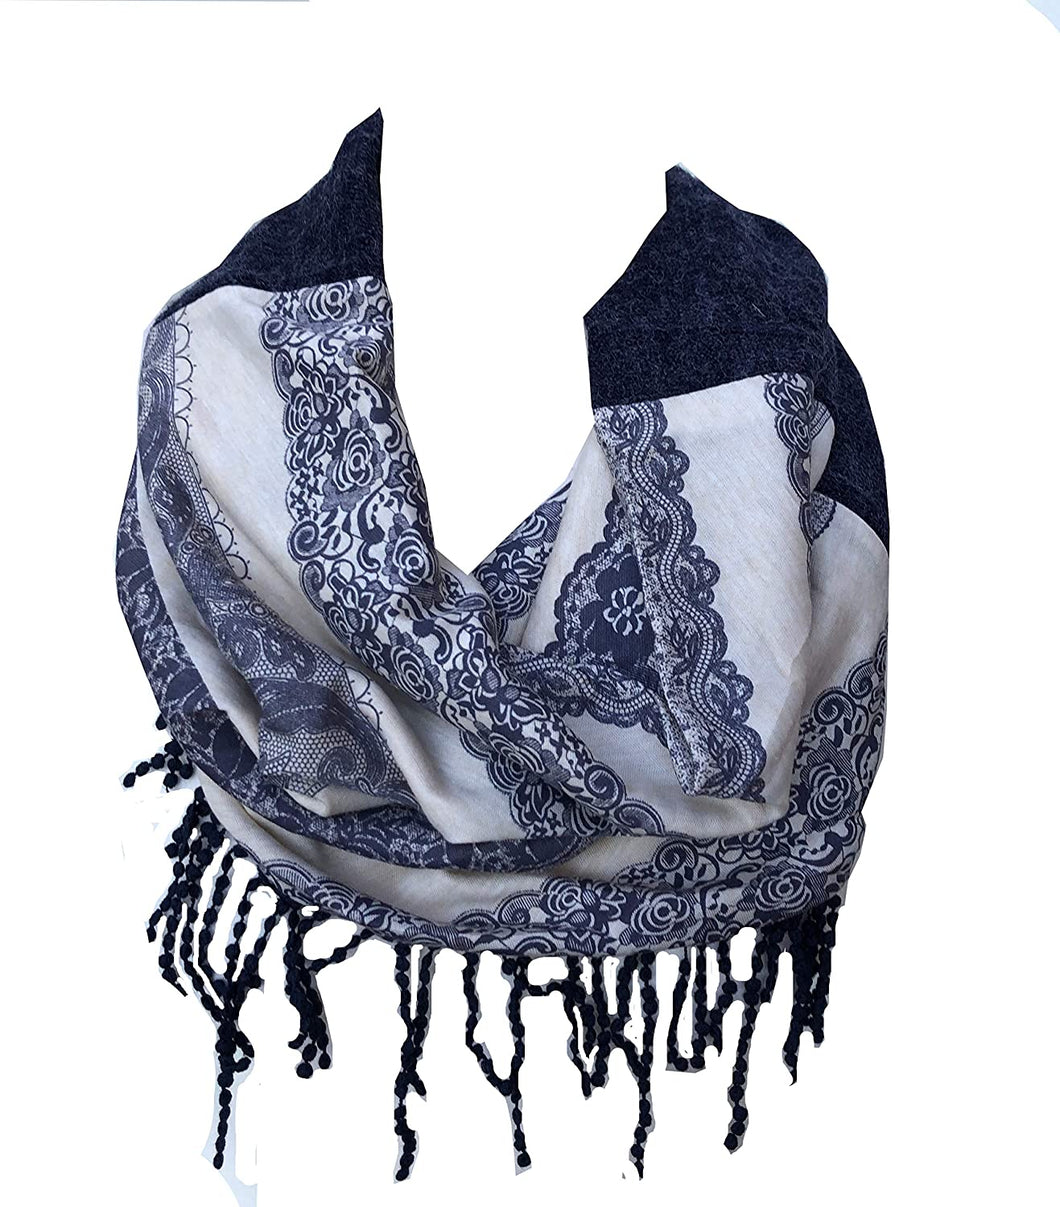 Blue funky snood with diamond design finish and small tassels